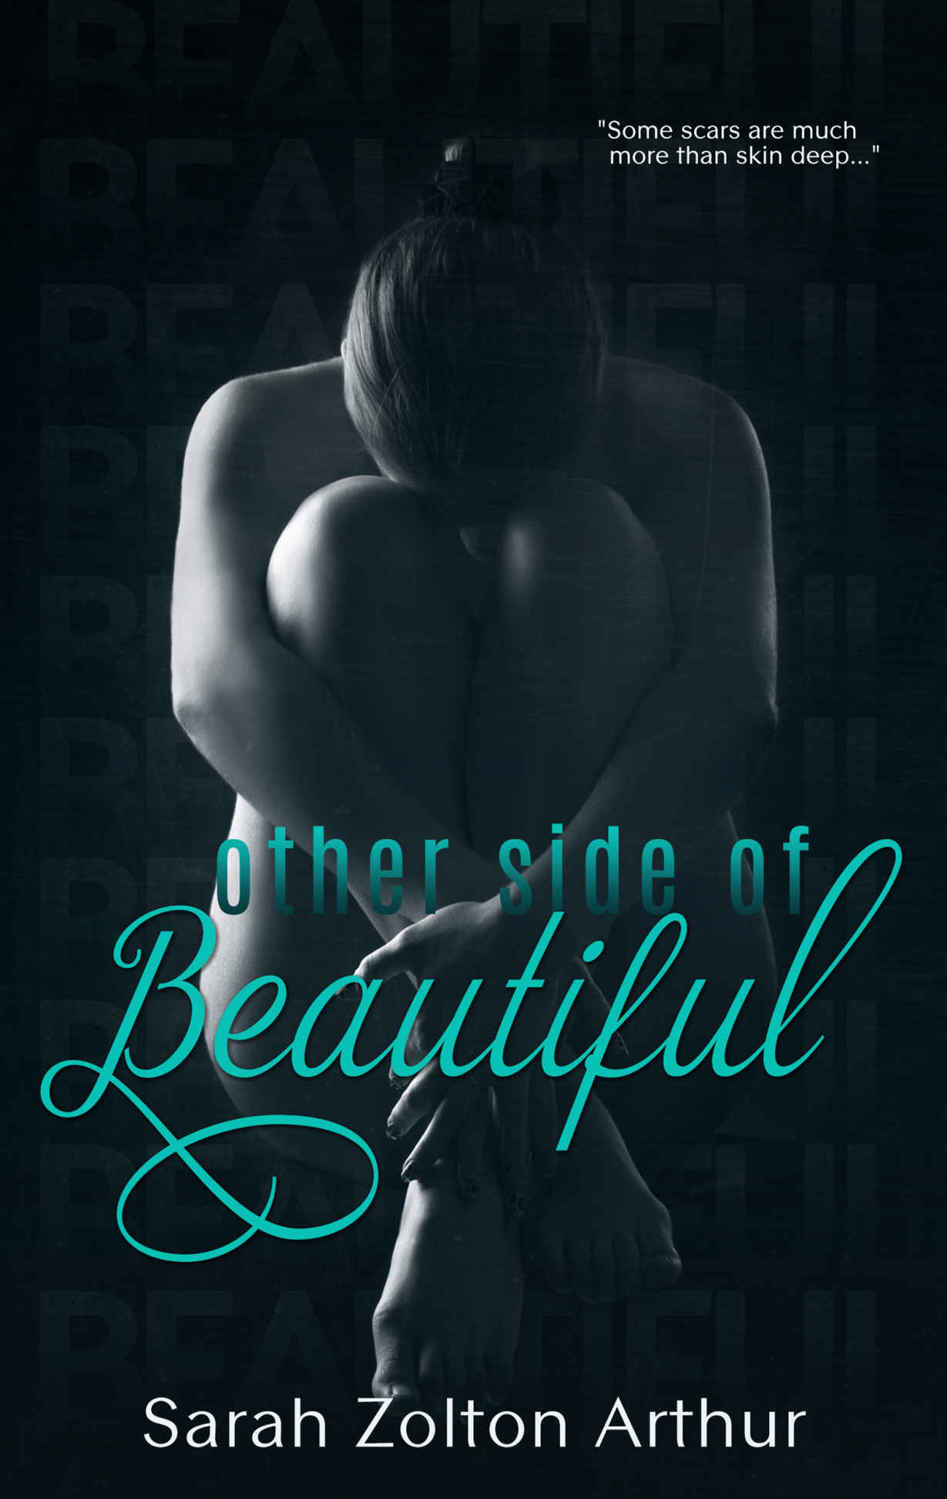 Other Side of Beautiful (A Beautifully Disturbed #1) by Sarah Zolton Arthur